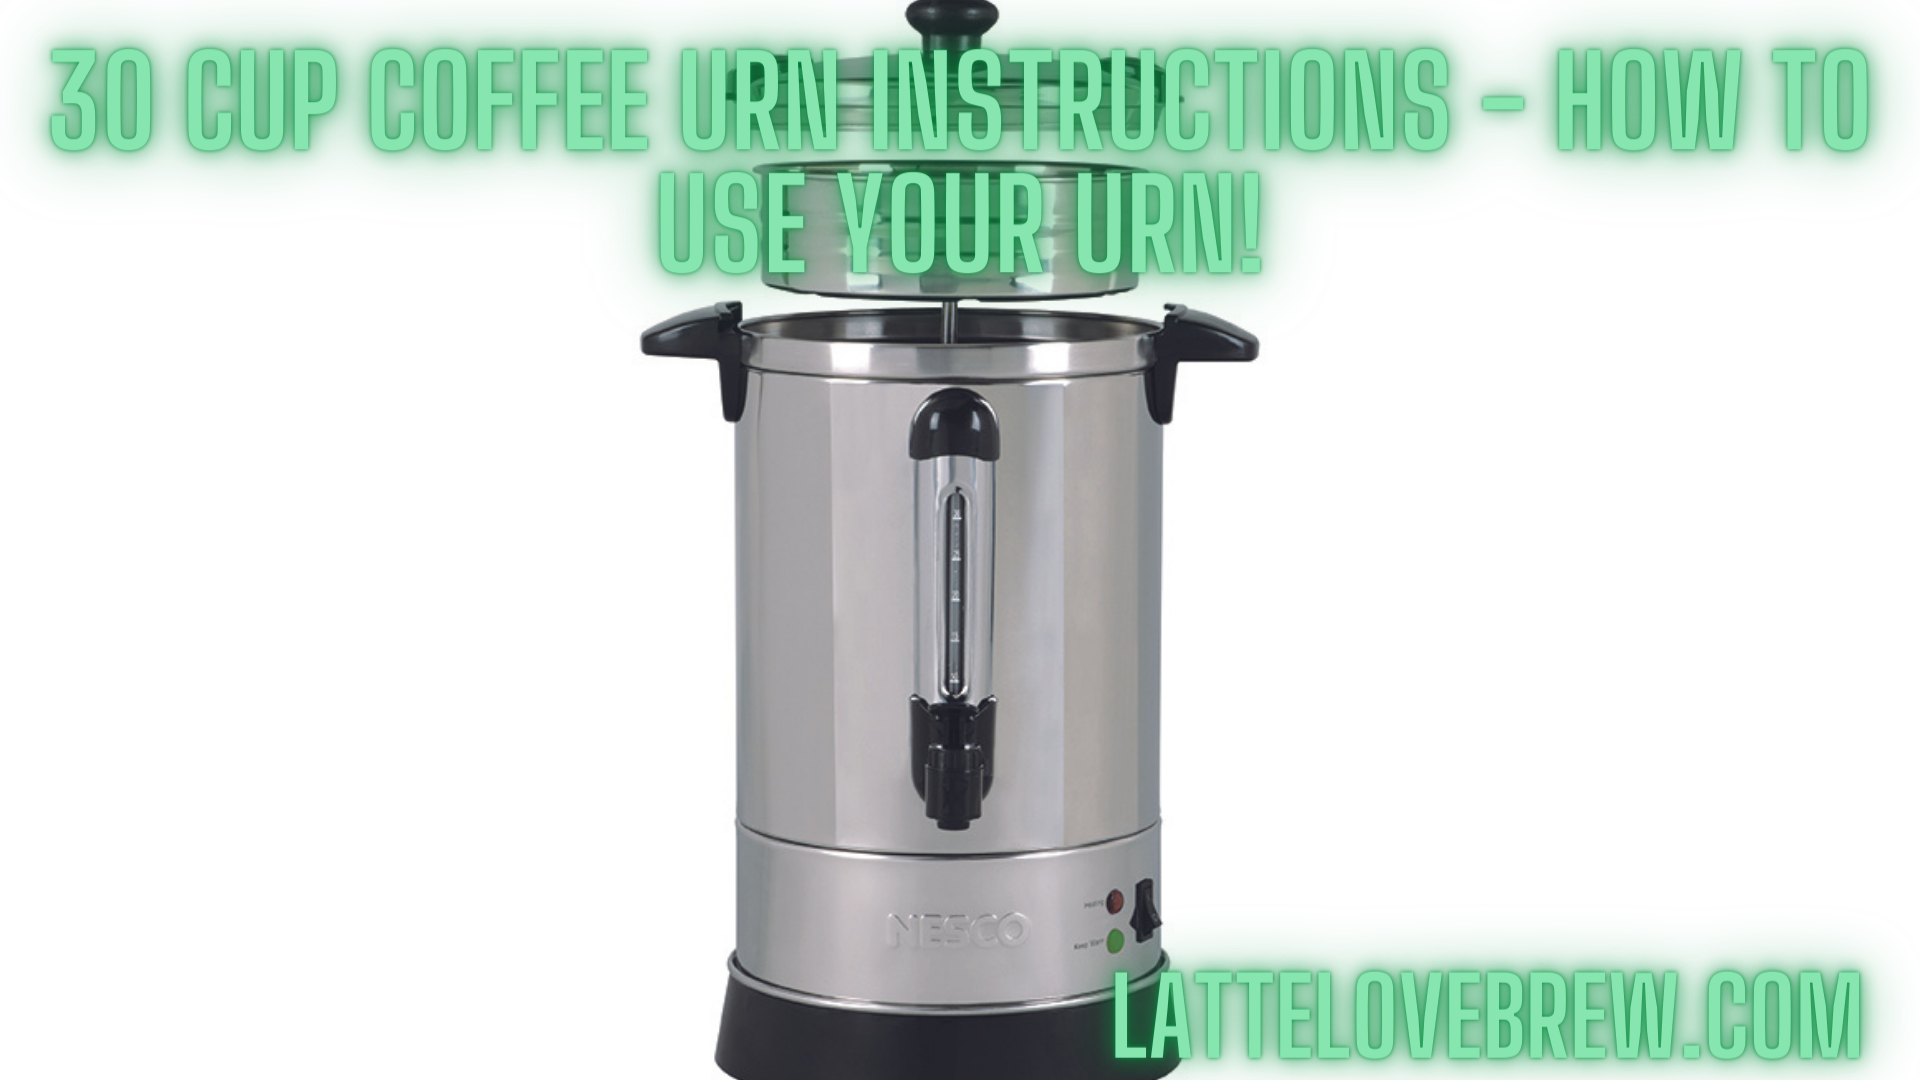 https://lattelovebrew.com/wp-content/uploads/2021/09/30-Cup-Coffee-Urn-Instructions-How-To-Use-Your-Urn.png